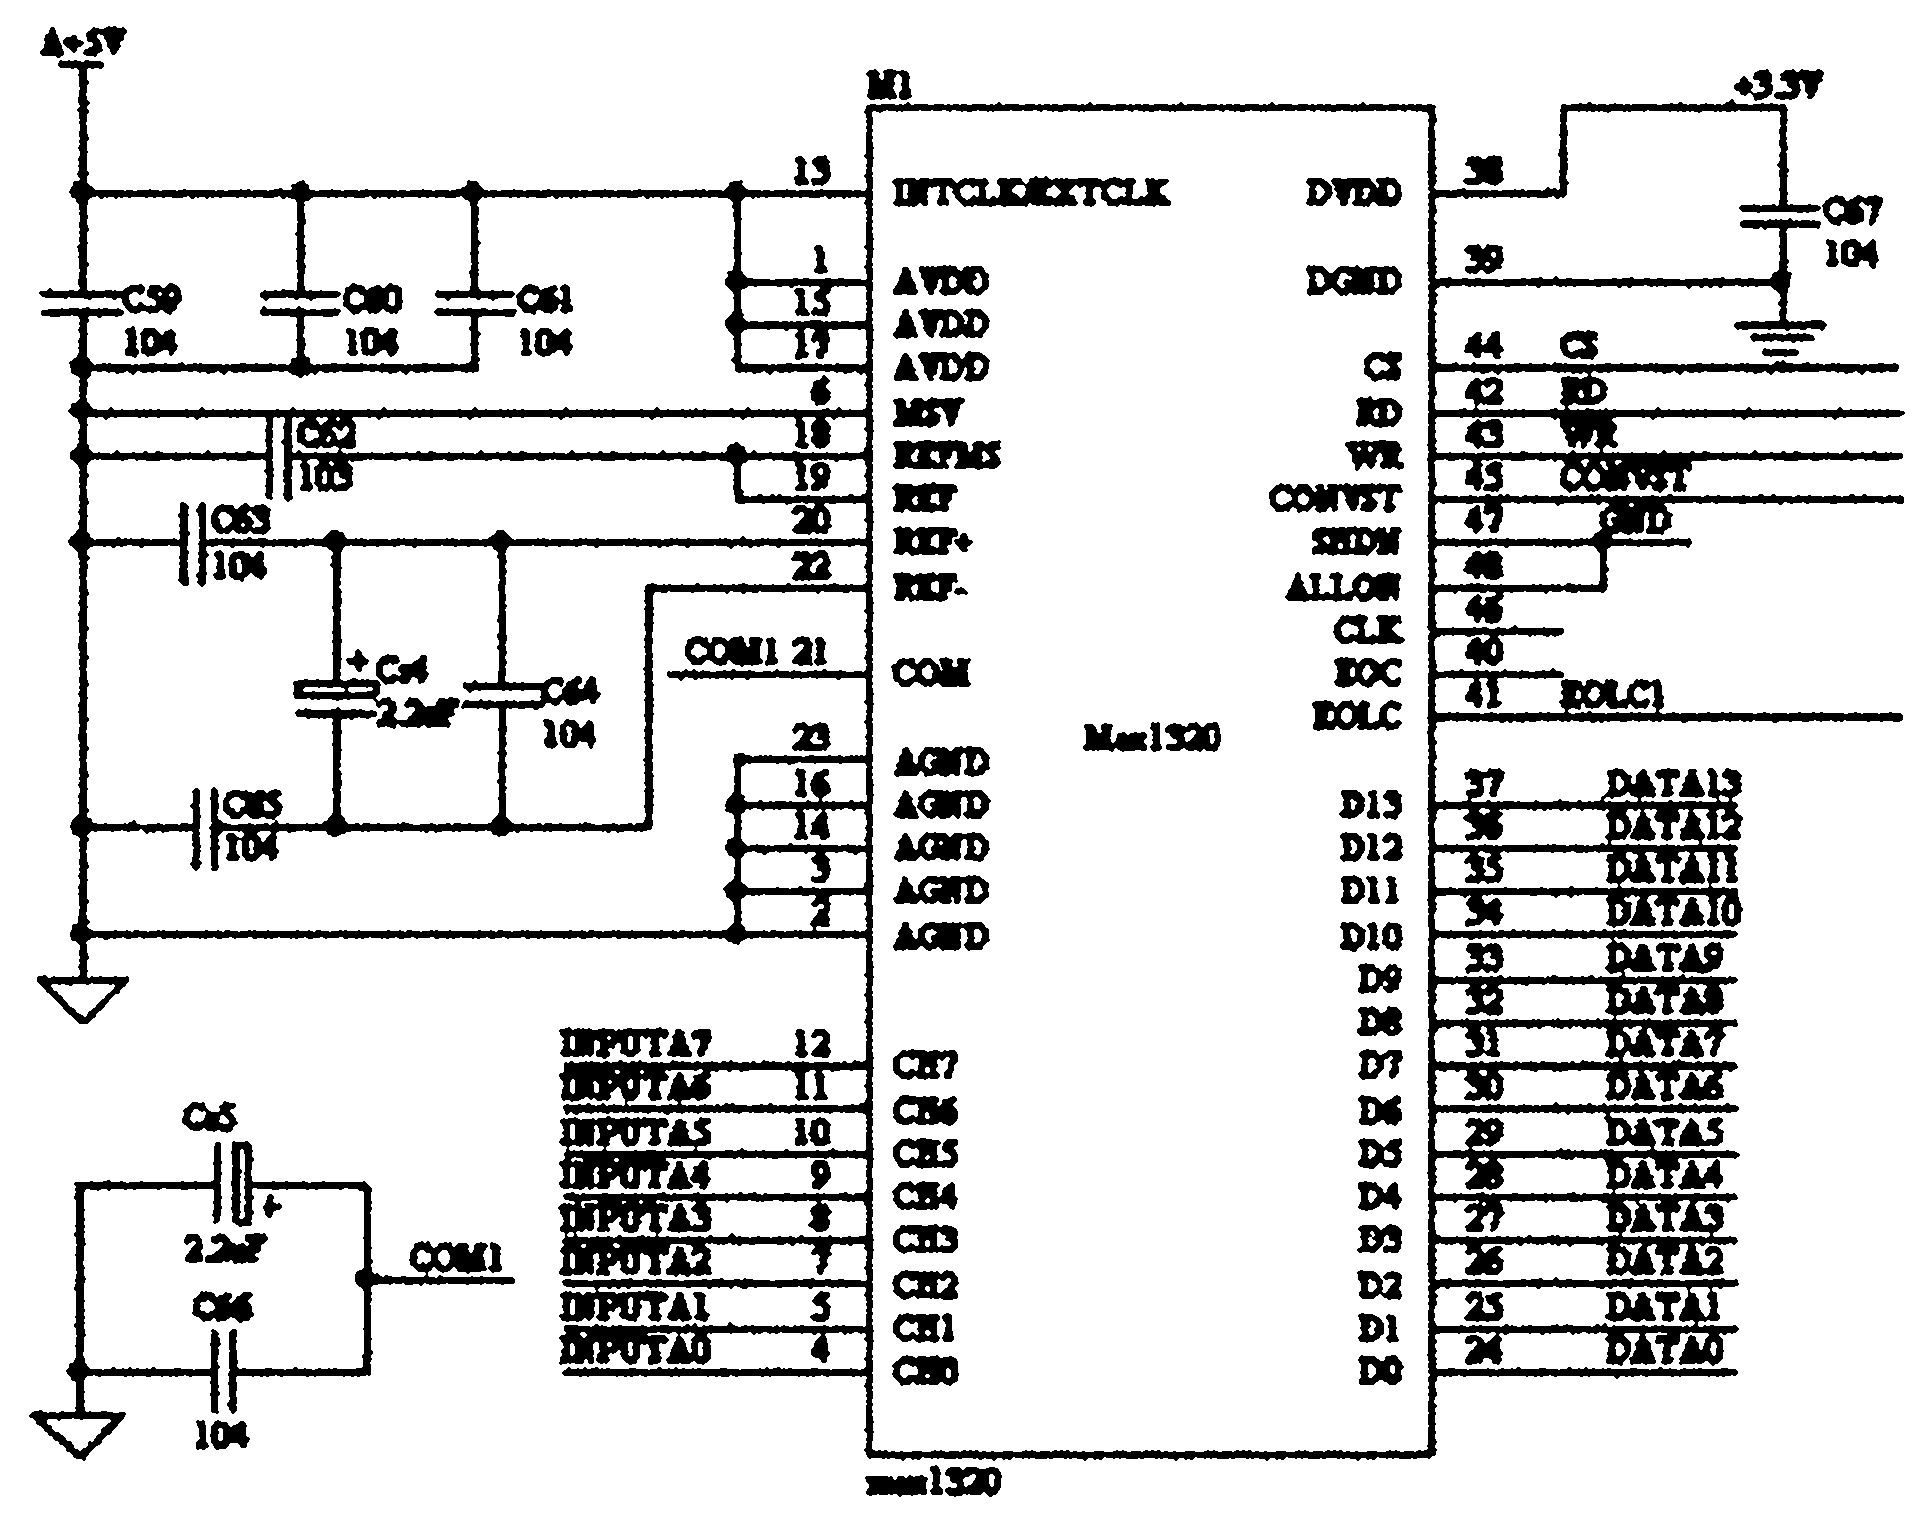 Turbine status data acquisition device based on personal computer 104 (PC104) bus